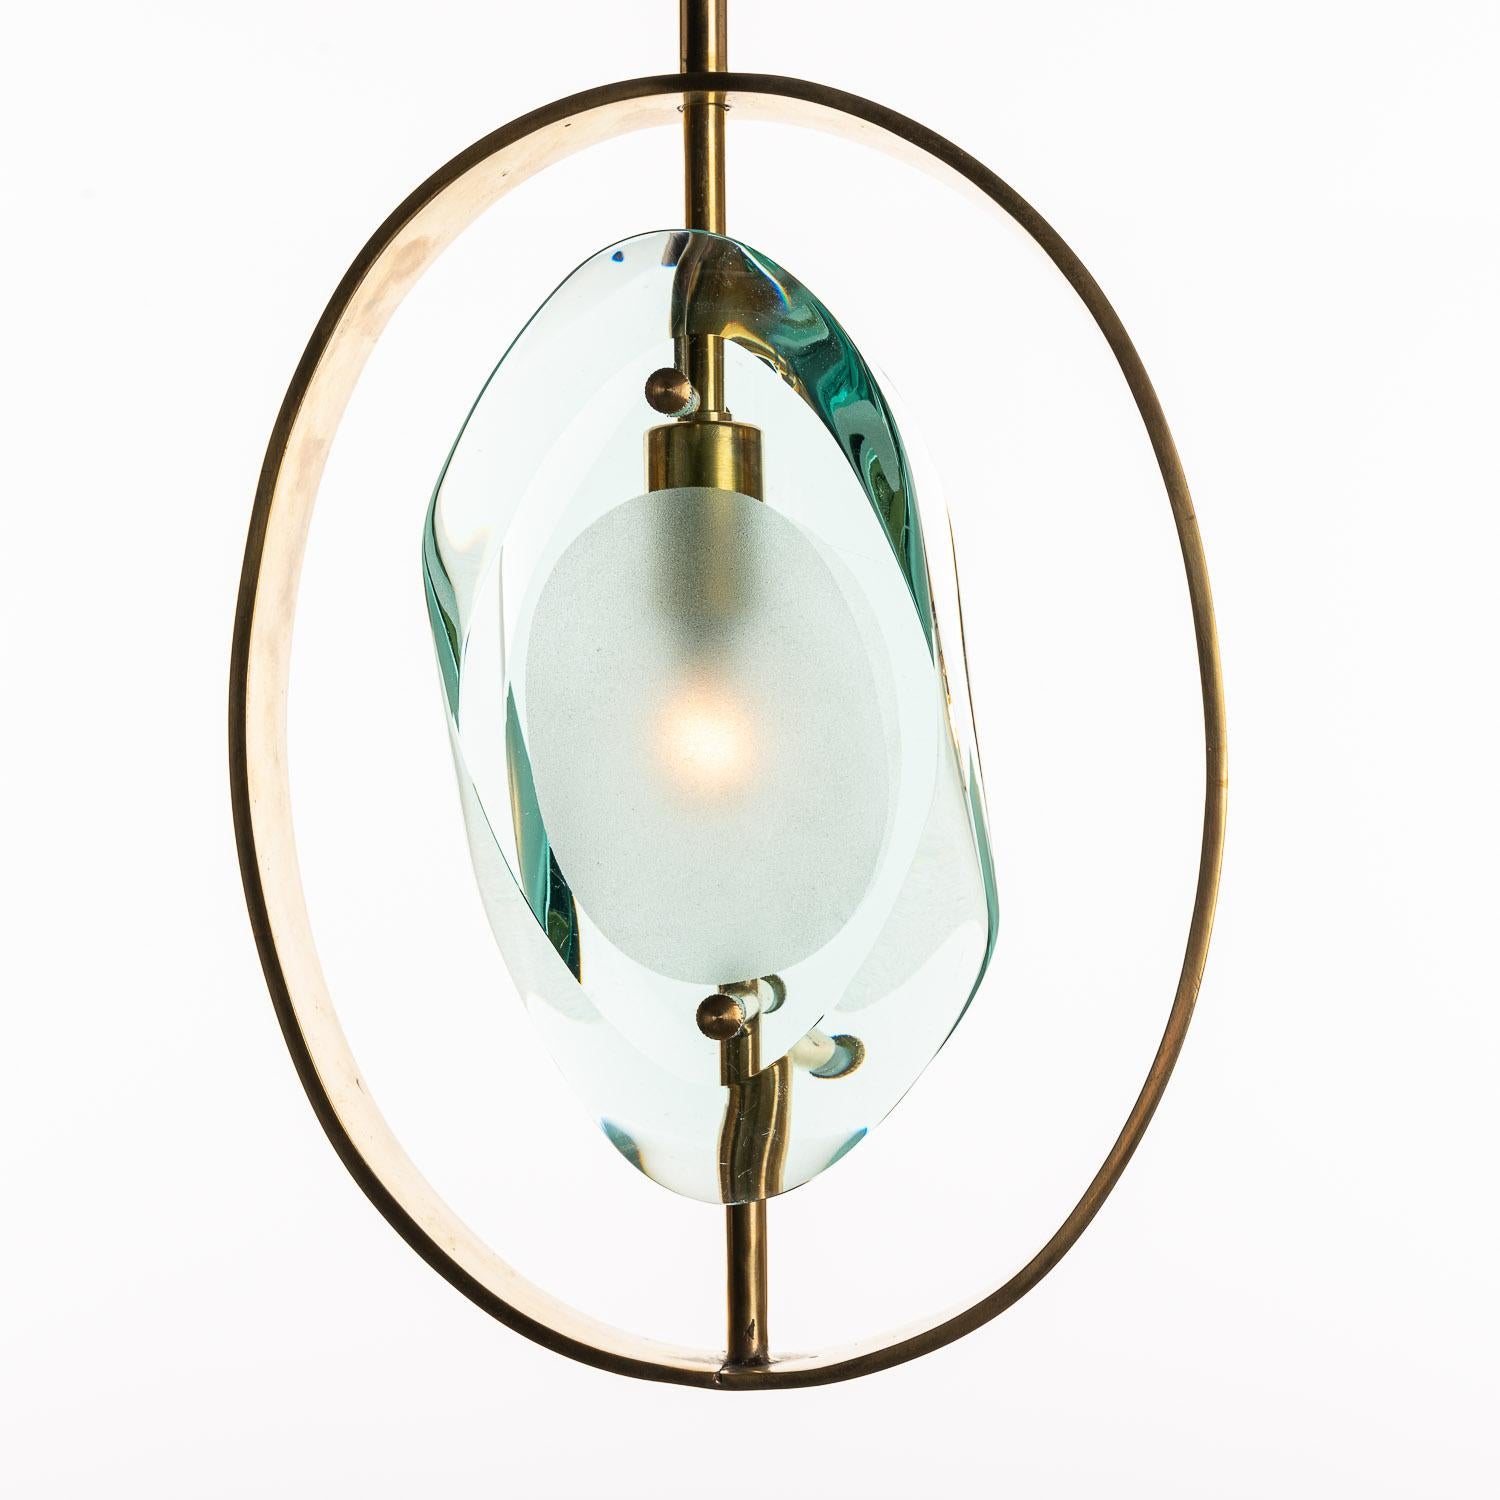 Very elegant 1960's pendant by Max Ingrand for Fontana Arte, Model 1933, from the Micro series. 
The iconic double lens cut panels of thick (2cm) profiled polished Murano glass with etched glass centers placed within a polished brass ring suspended